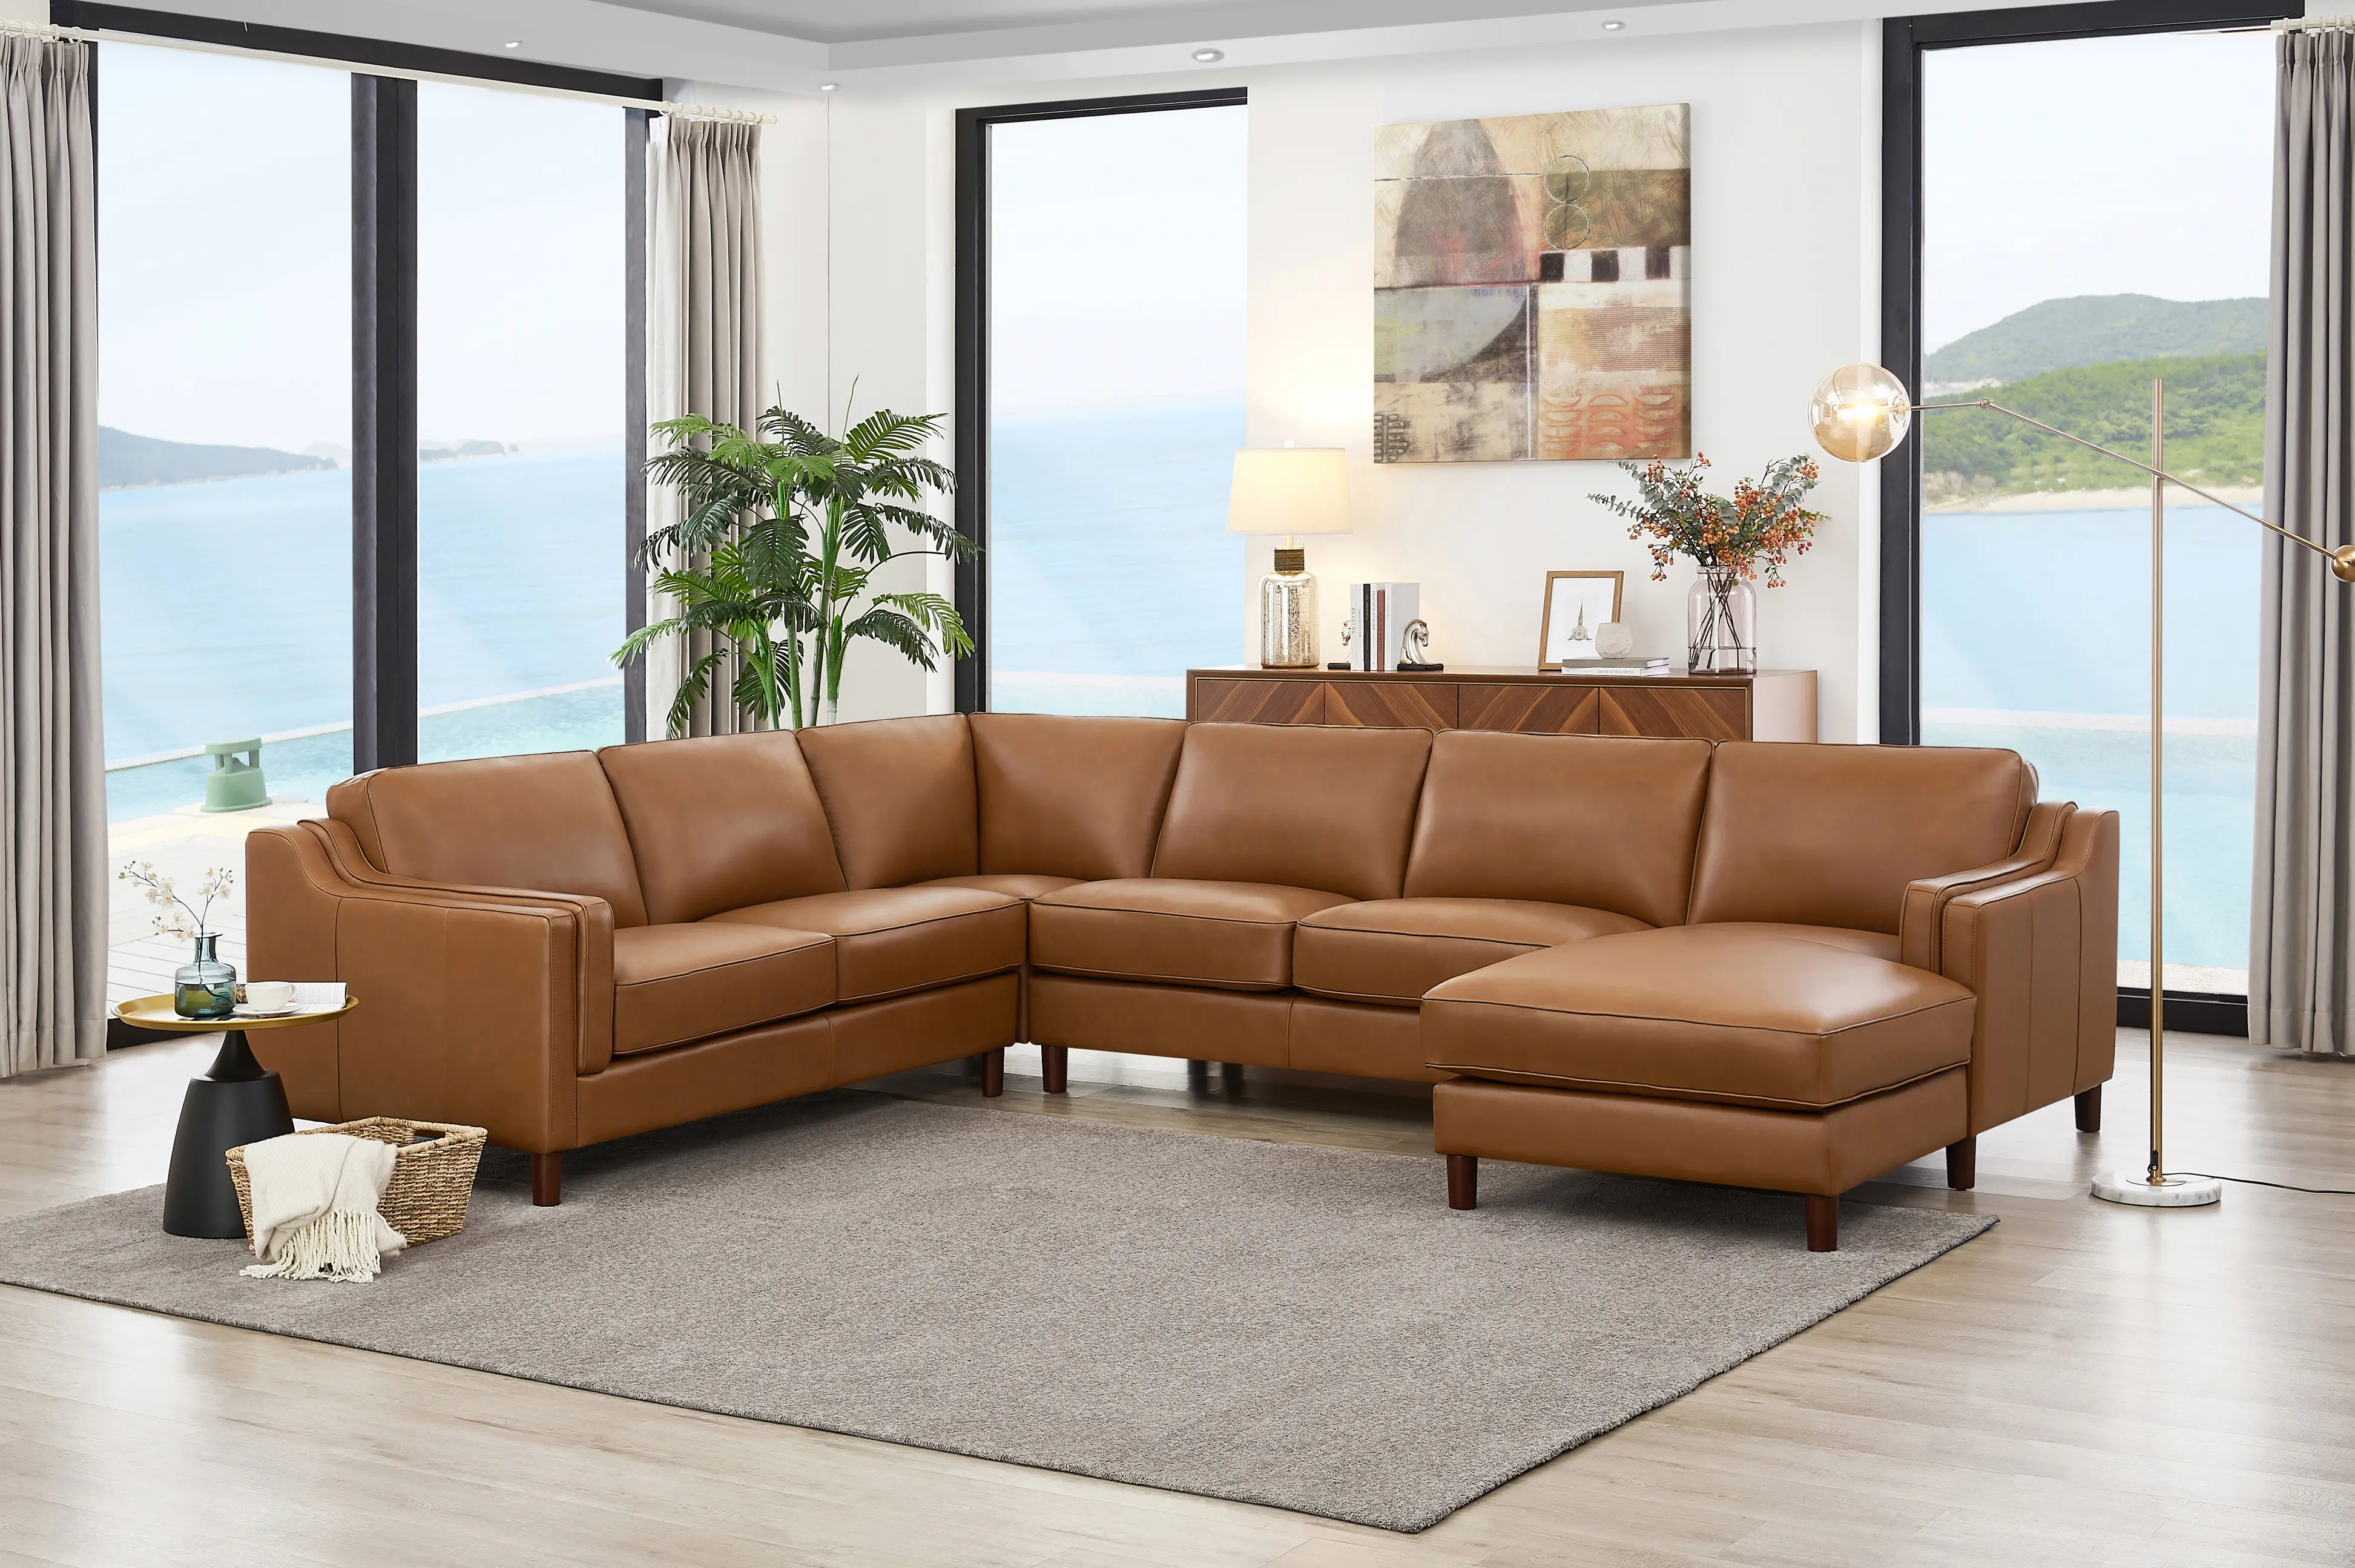 Ballari Cognac Brown Leather 4 Piece Sectional with Right-Facing...